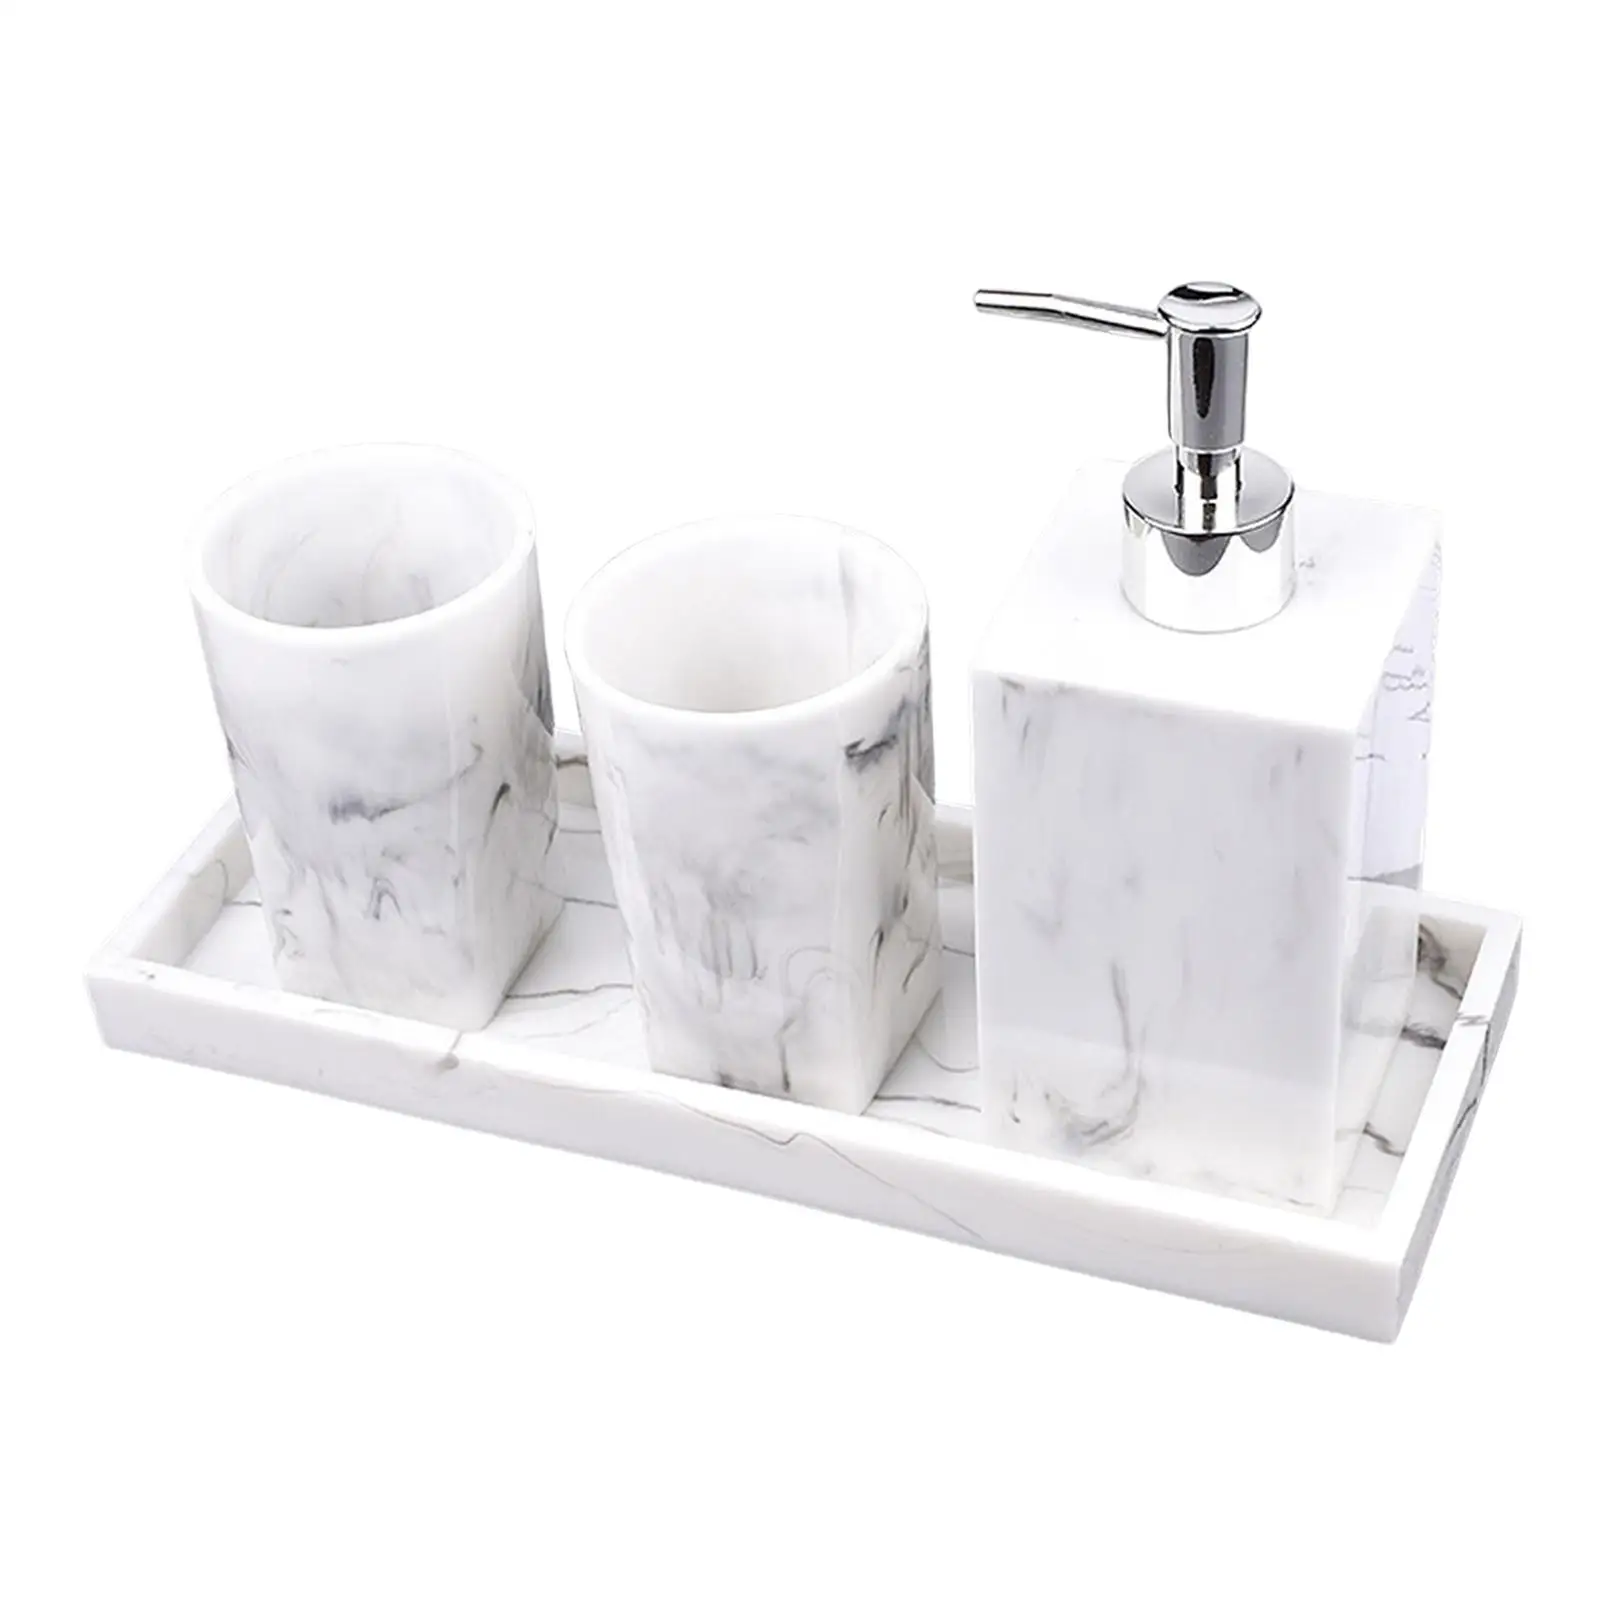 Bathroom Accessories Set Lotion Bottle Tray Refillable Essential Set for Bathroom Counter Hotel Apartment Easy Clean Sturdy